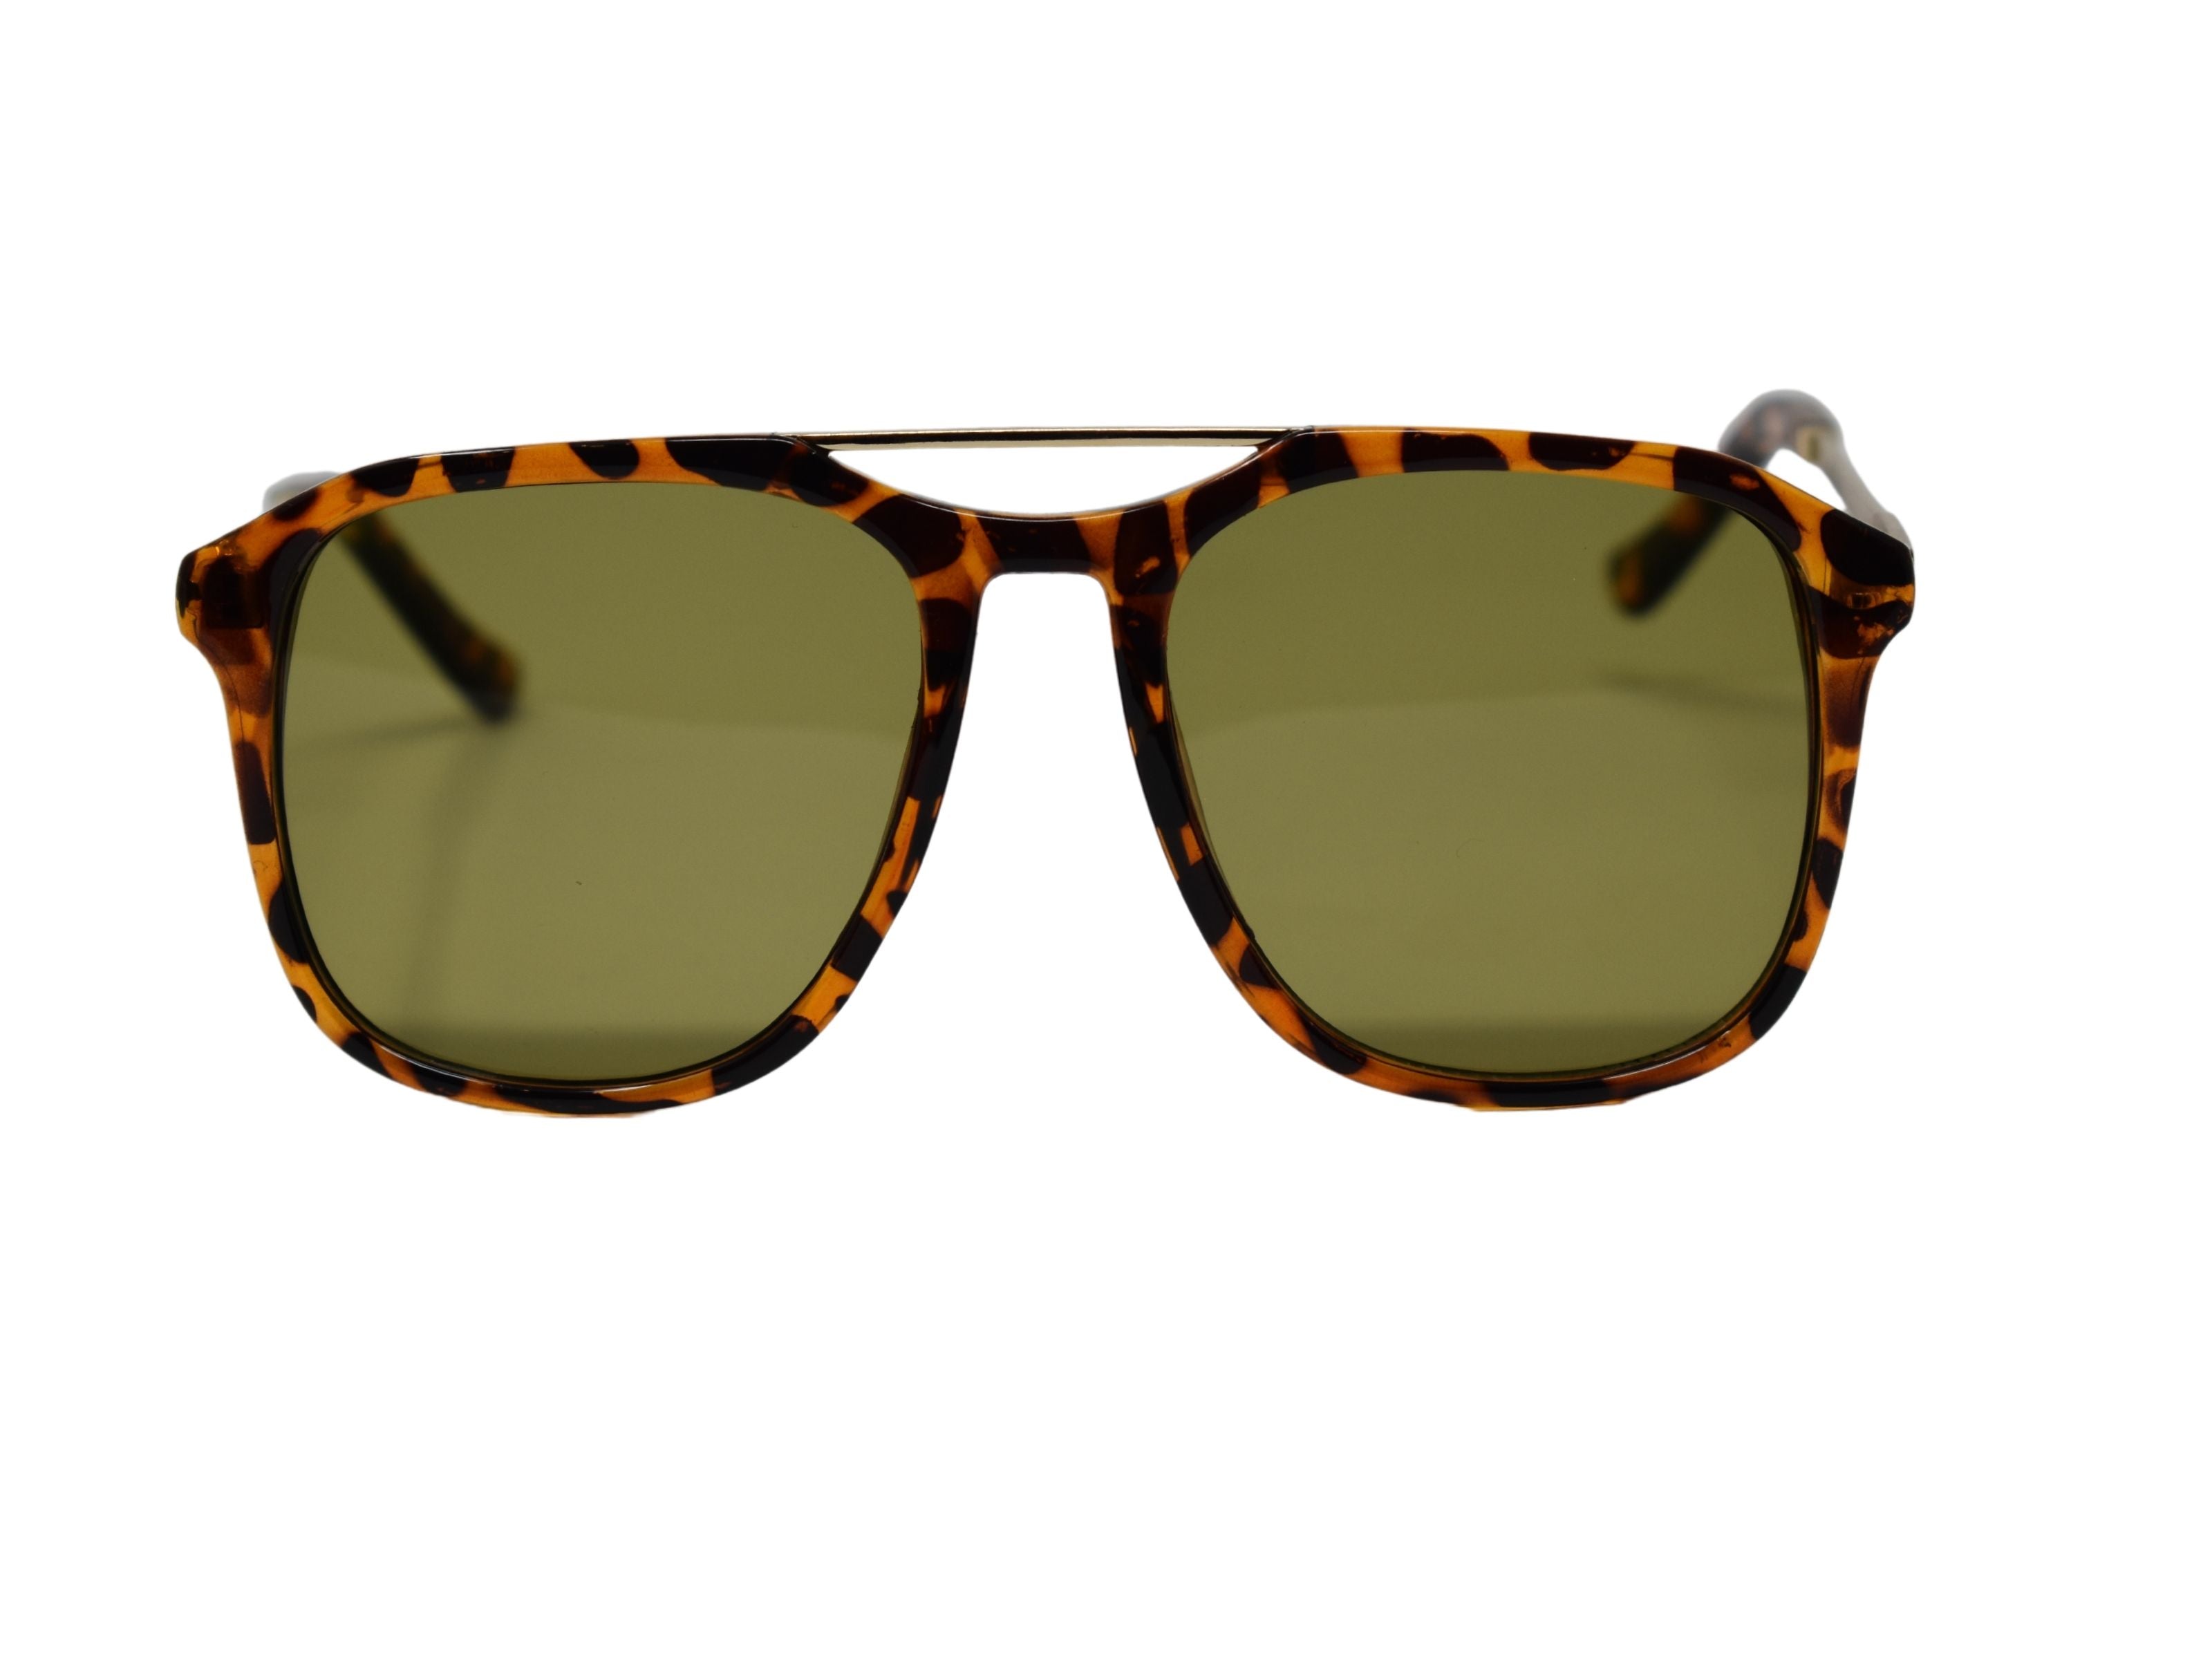 Bring an instant chic appeal with our stylish Breita warm tortoise aviator sunglasses.